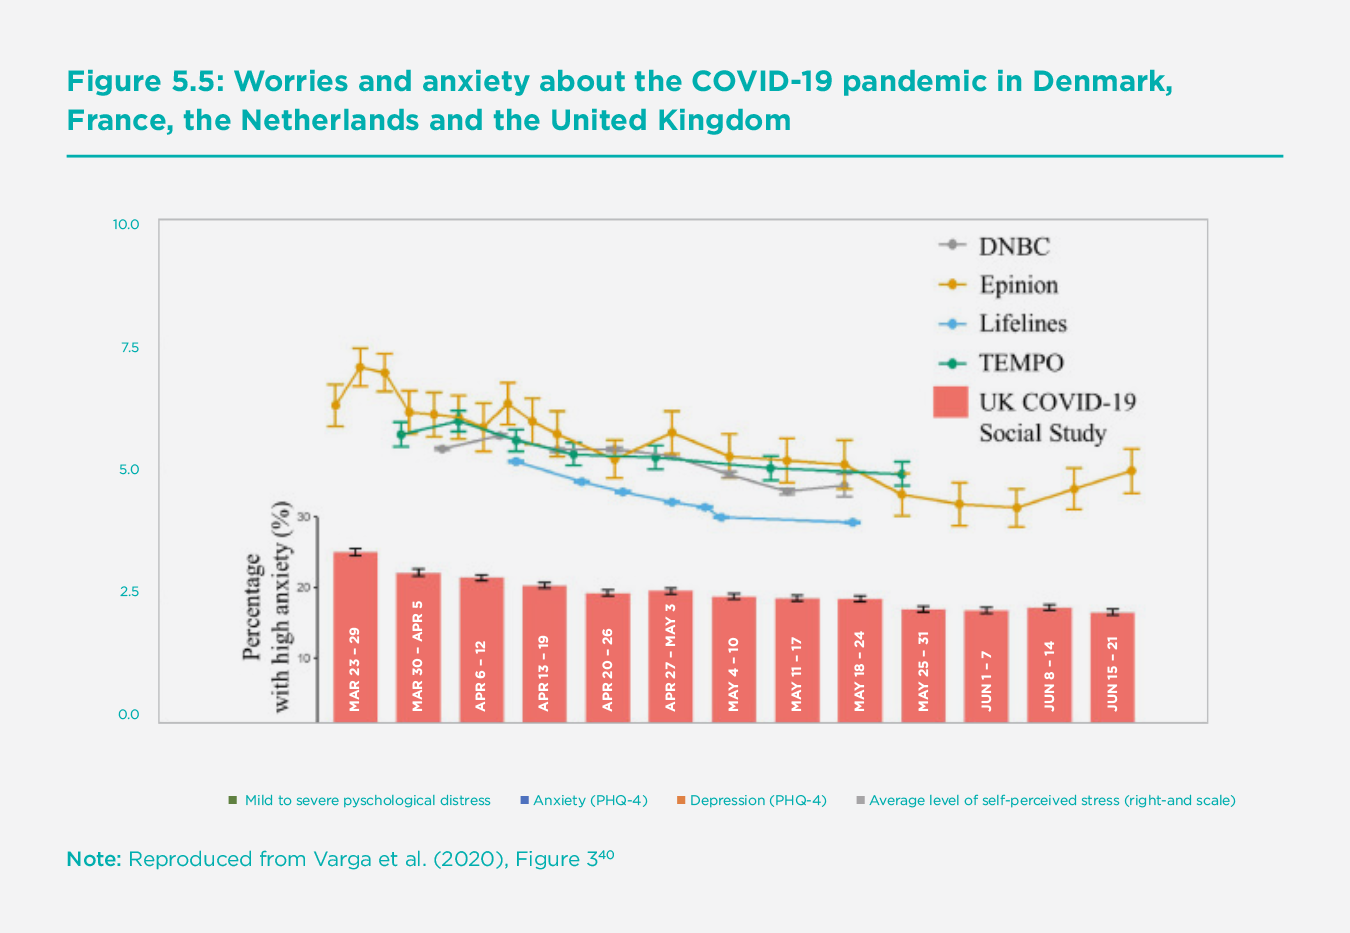 Figure 5.5 Worries and anxiety about the COVID-19 pandemic in Denmark, France, the Netherlands and the United Kingdom